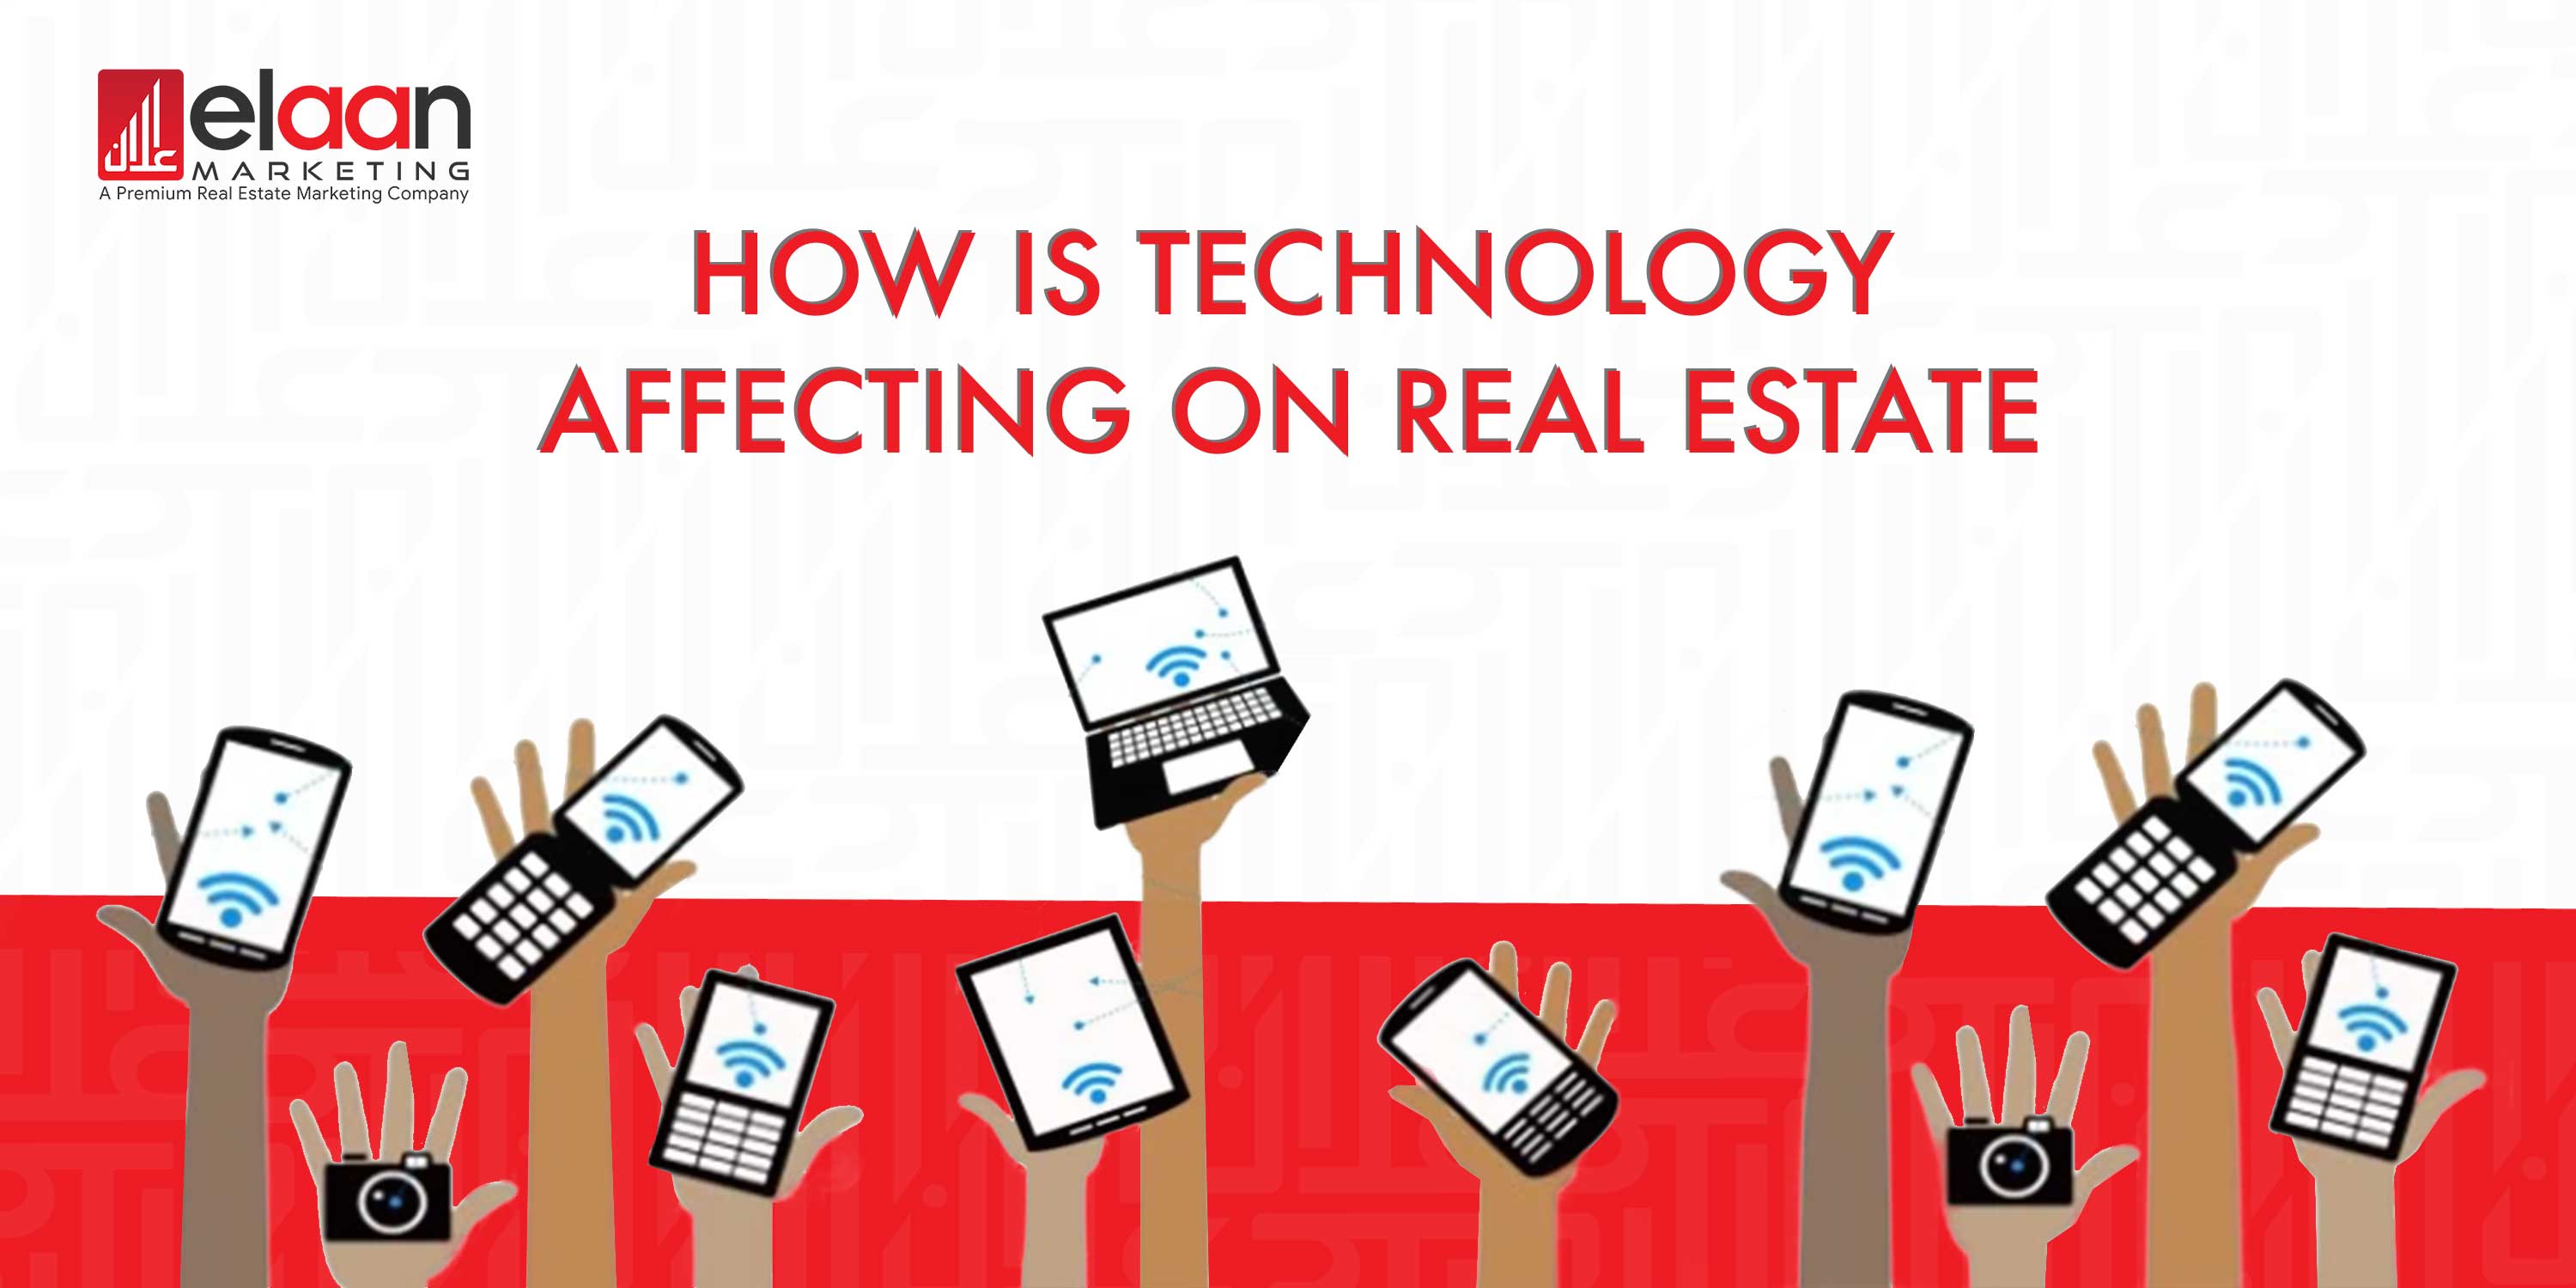 How is Technology Affecting Real Estate?